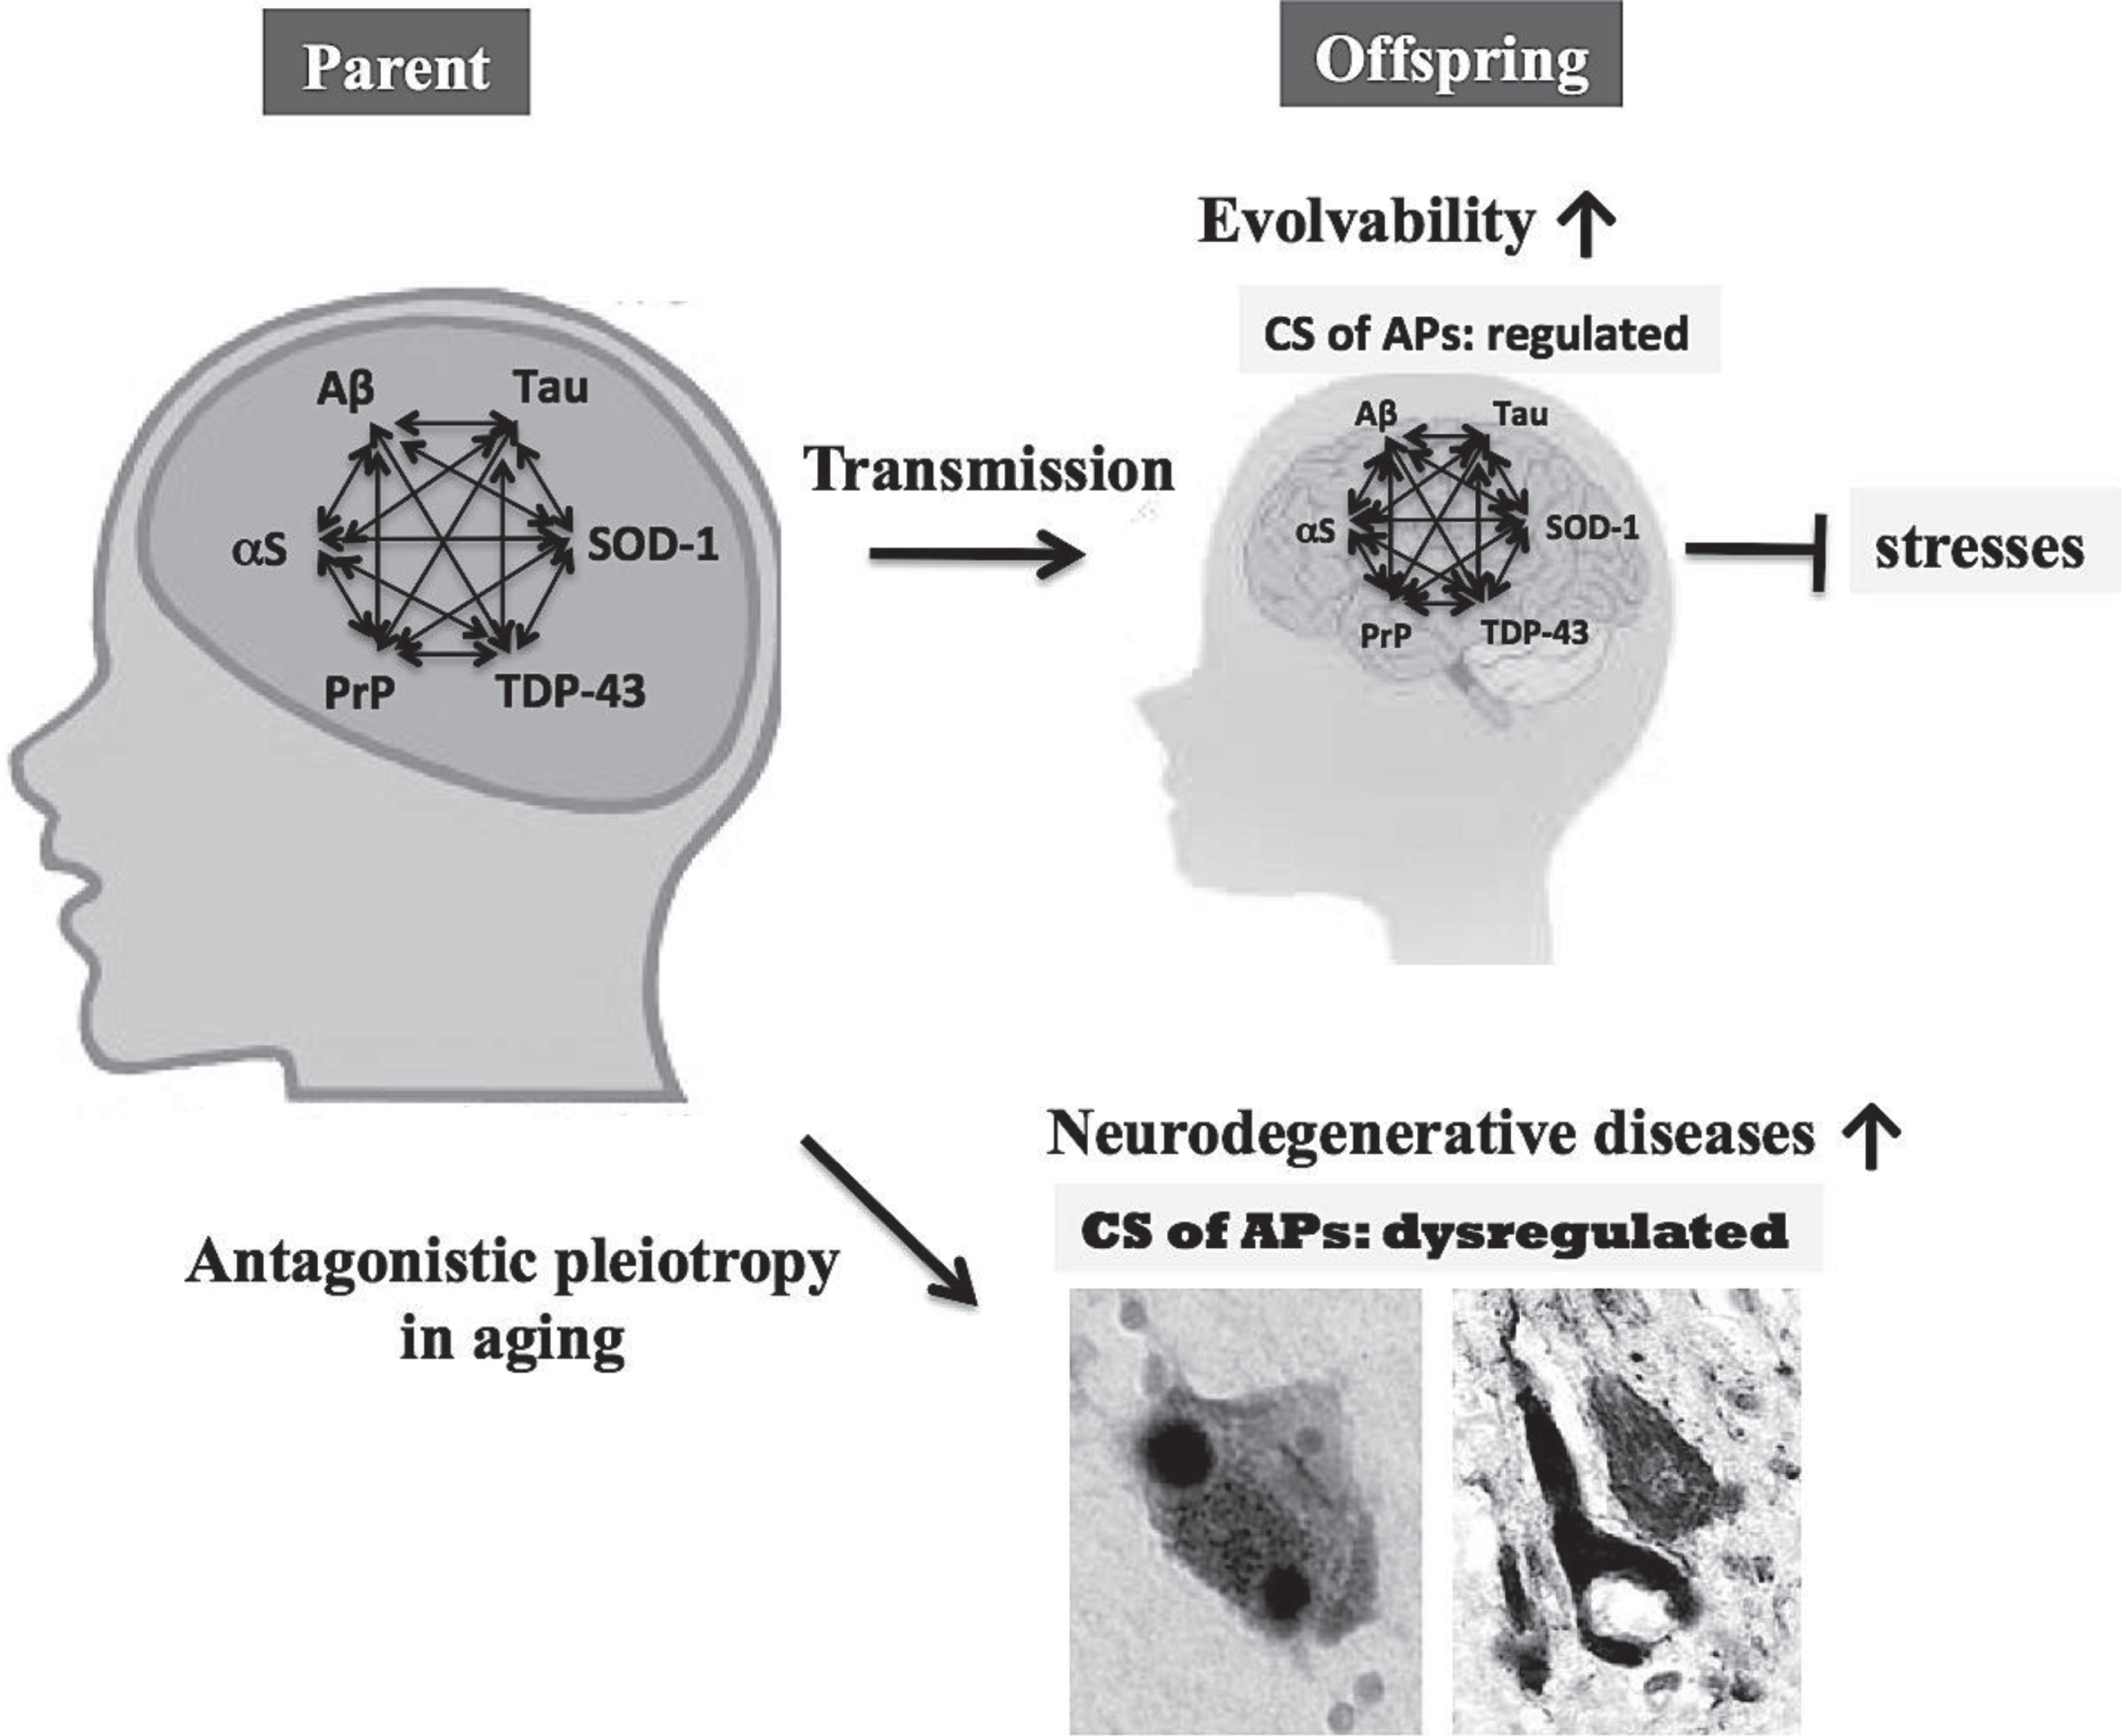 Role of the CS of APs in evolvability and neurodegenerative diseases. The CS of multiple APs, such as Aβ, αS, tau, SOD-1, TDP-43, and PrP, may stimulate protein aggregation, resulting in increased evolvability for offspring to cope with forth-coming stressors. Instead, antagonistic pleiotropy in aging might promote neurodegeneration in parental brain. Therefore, the CS of multiple APs may be beneficial for offspring, but detrimental for parents.